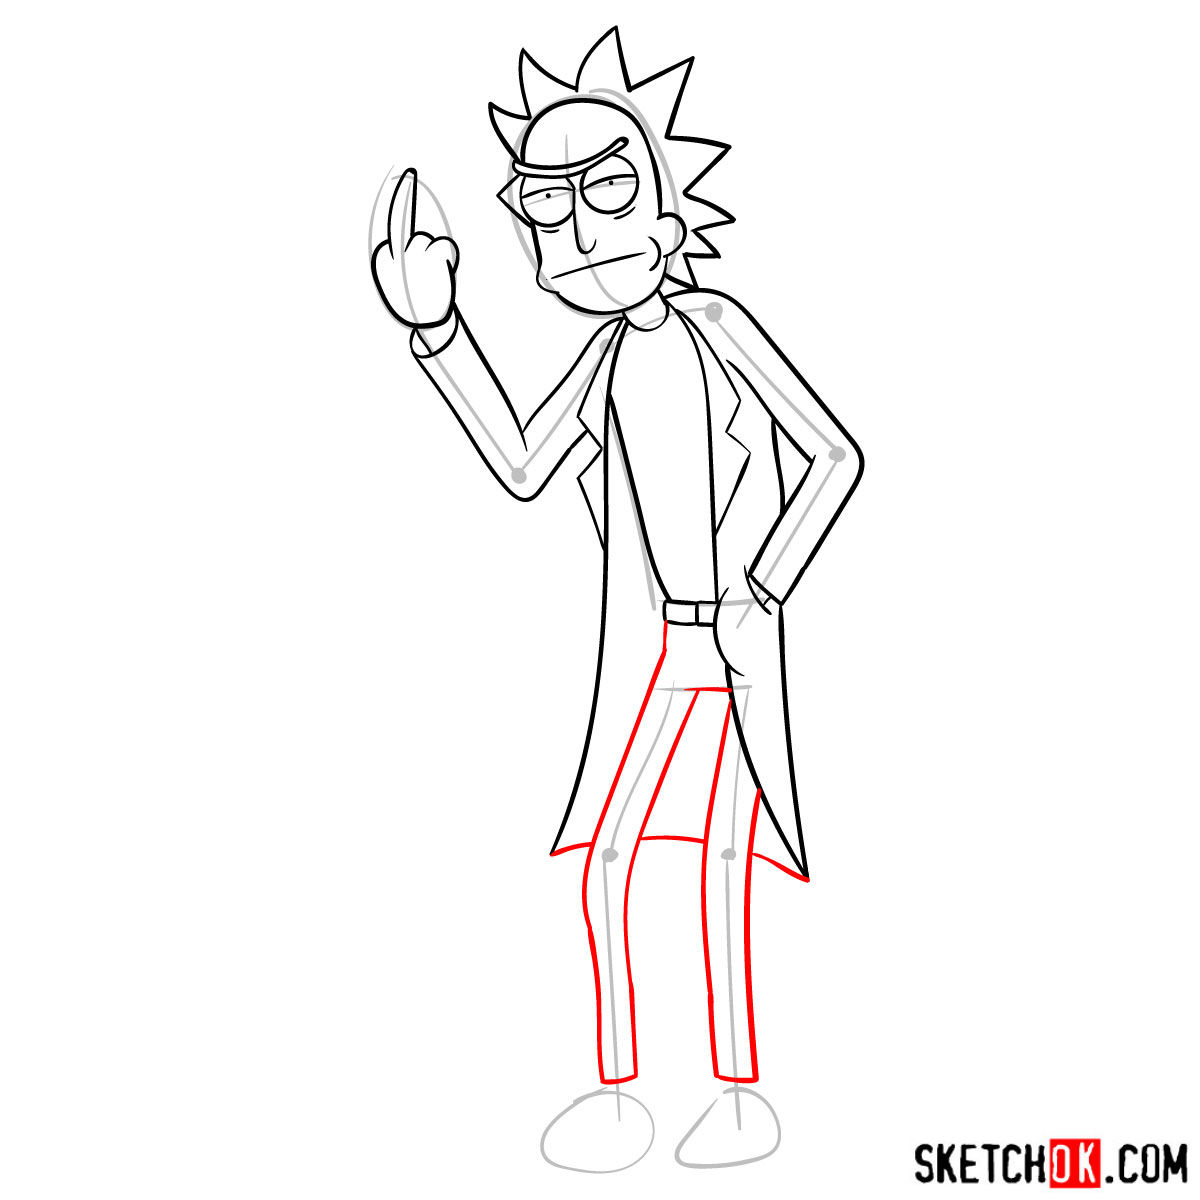 How to draw Rick showing his middle finger (Rick and Morty) - step 11